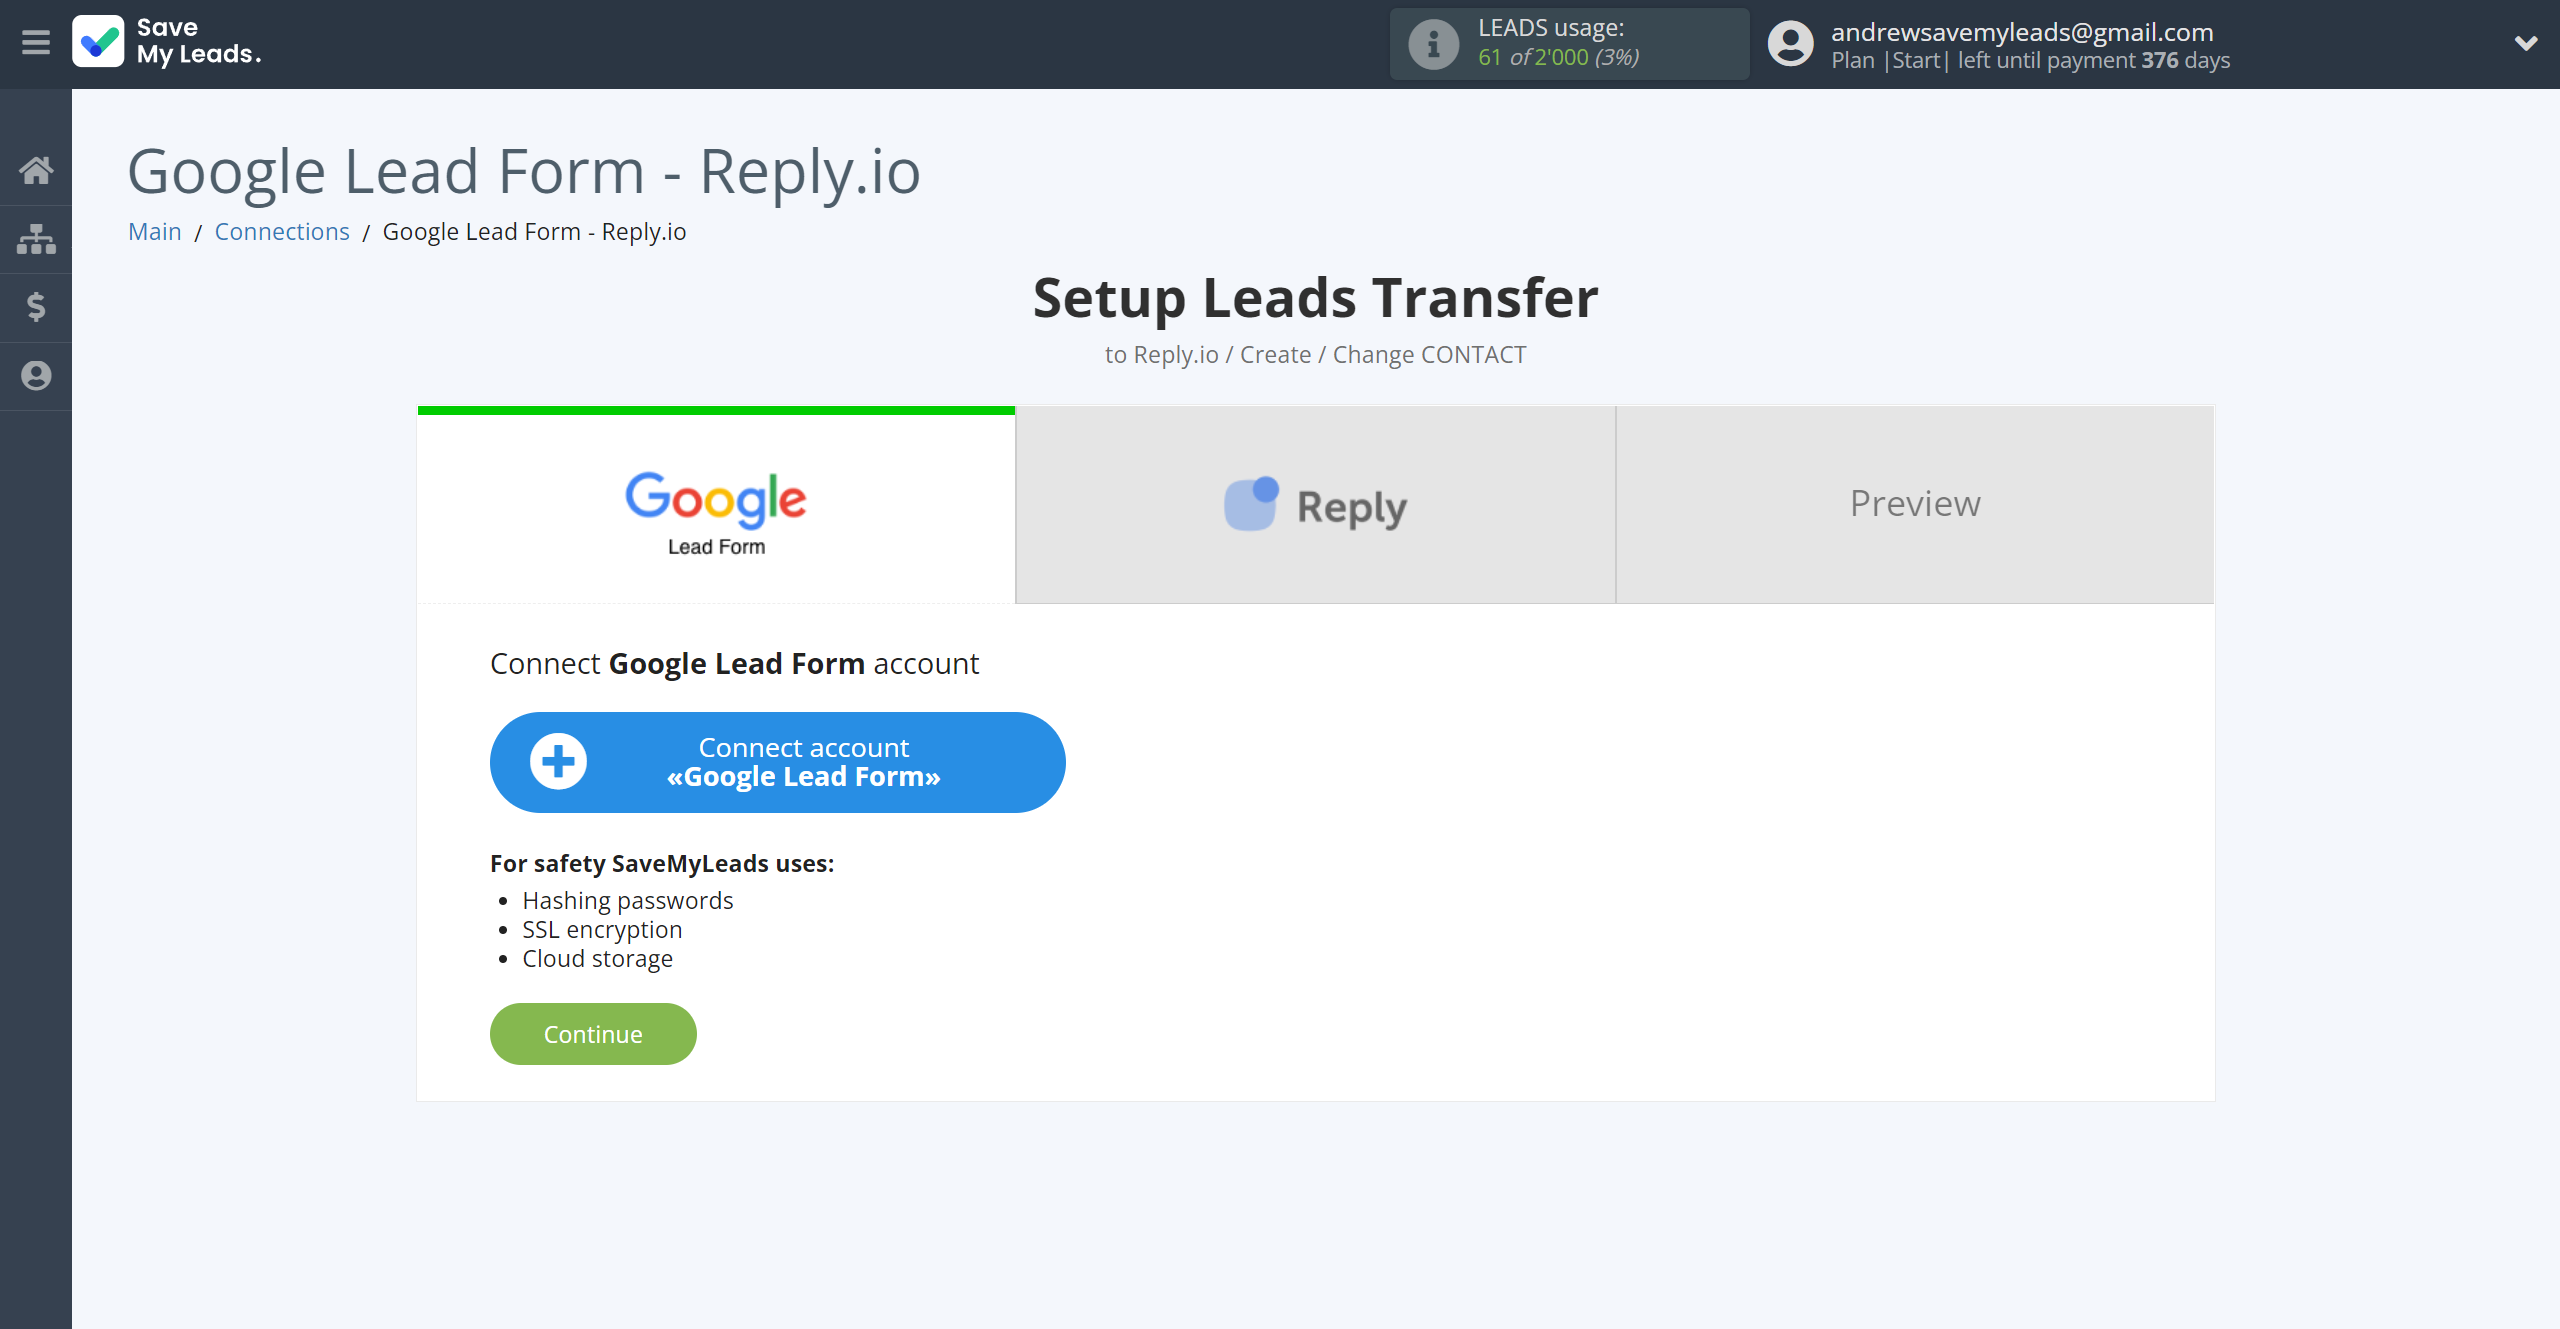 How to Connect Google Lead Form with Reply.io | Data Source account